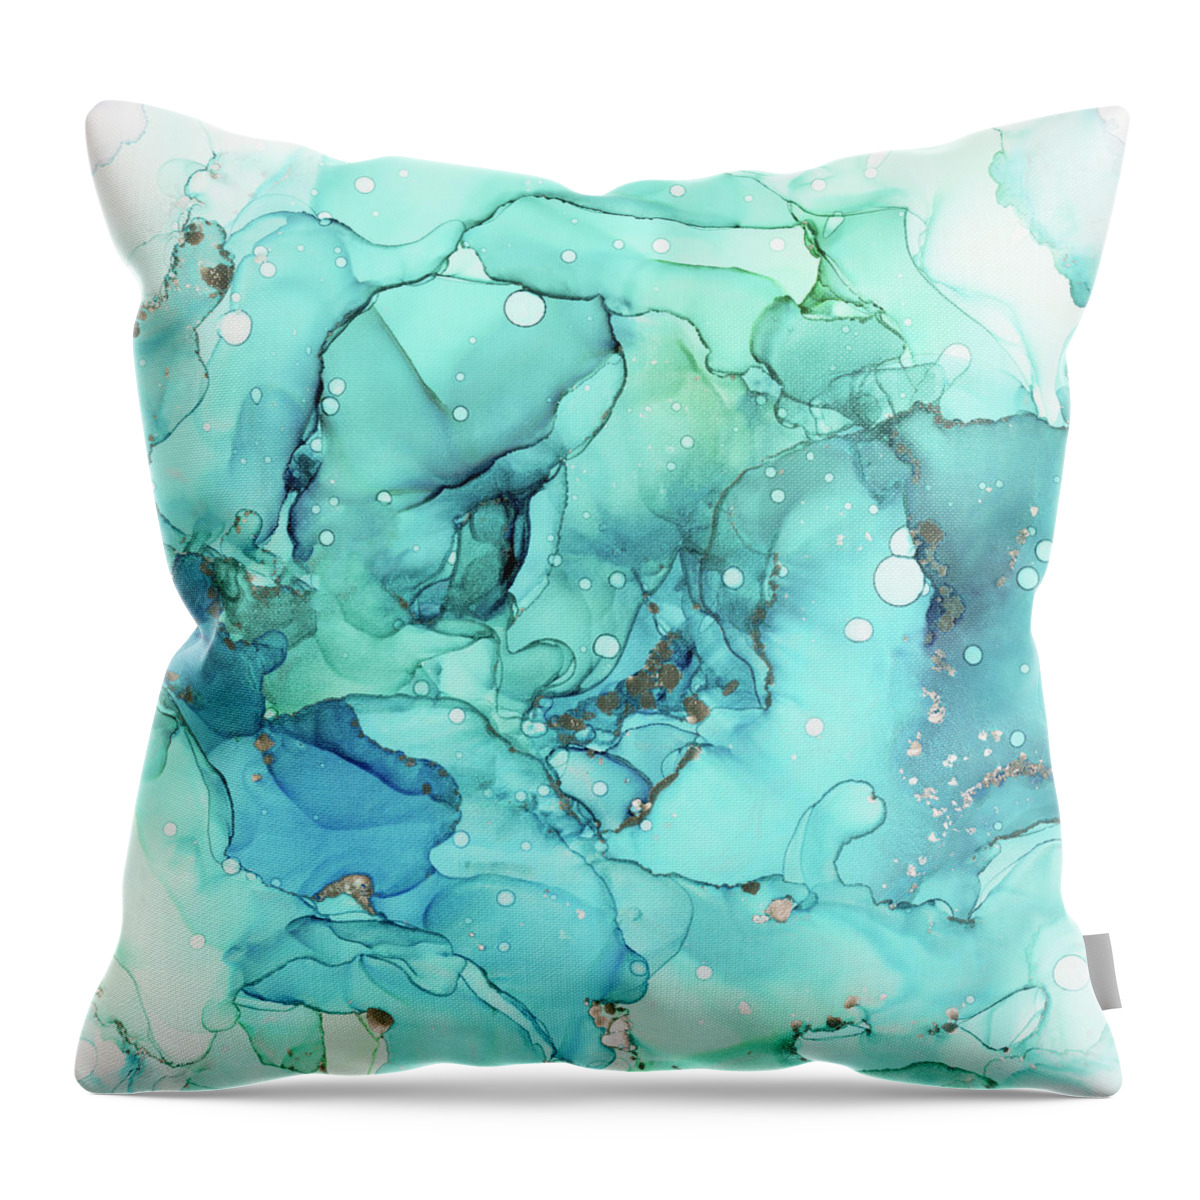 Ink Throw Pillow featuring the painting Teal Blue Chrome Abstract Ink by Olga Shvartsur